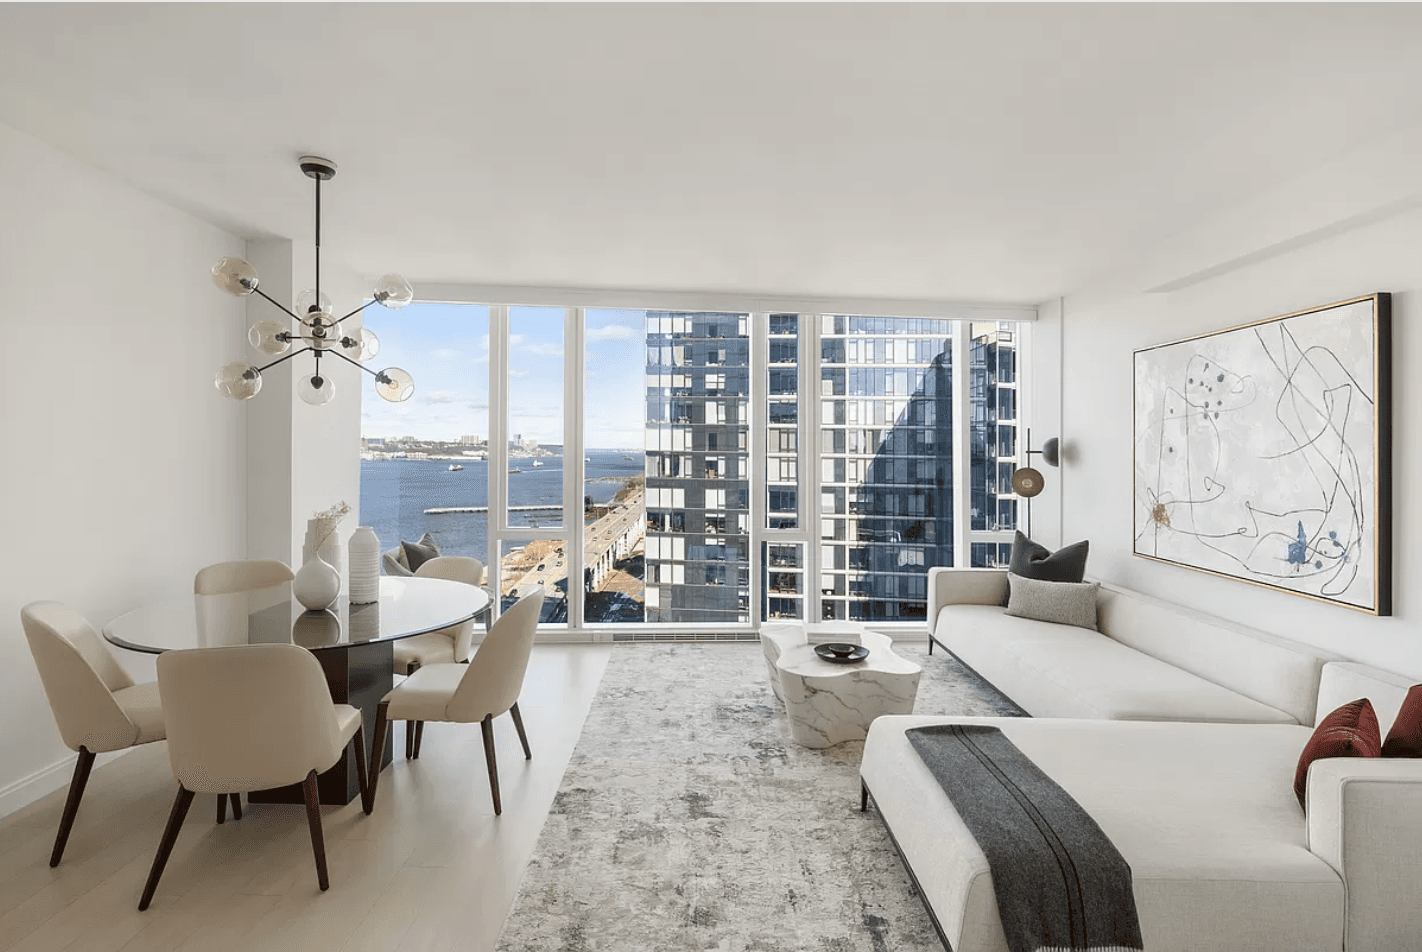 Huge Luxury 2 Bedroom Flooded with Light and Hudson River Views